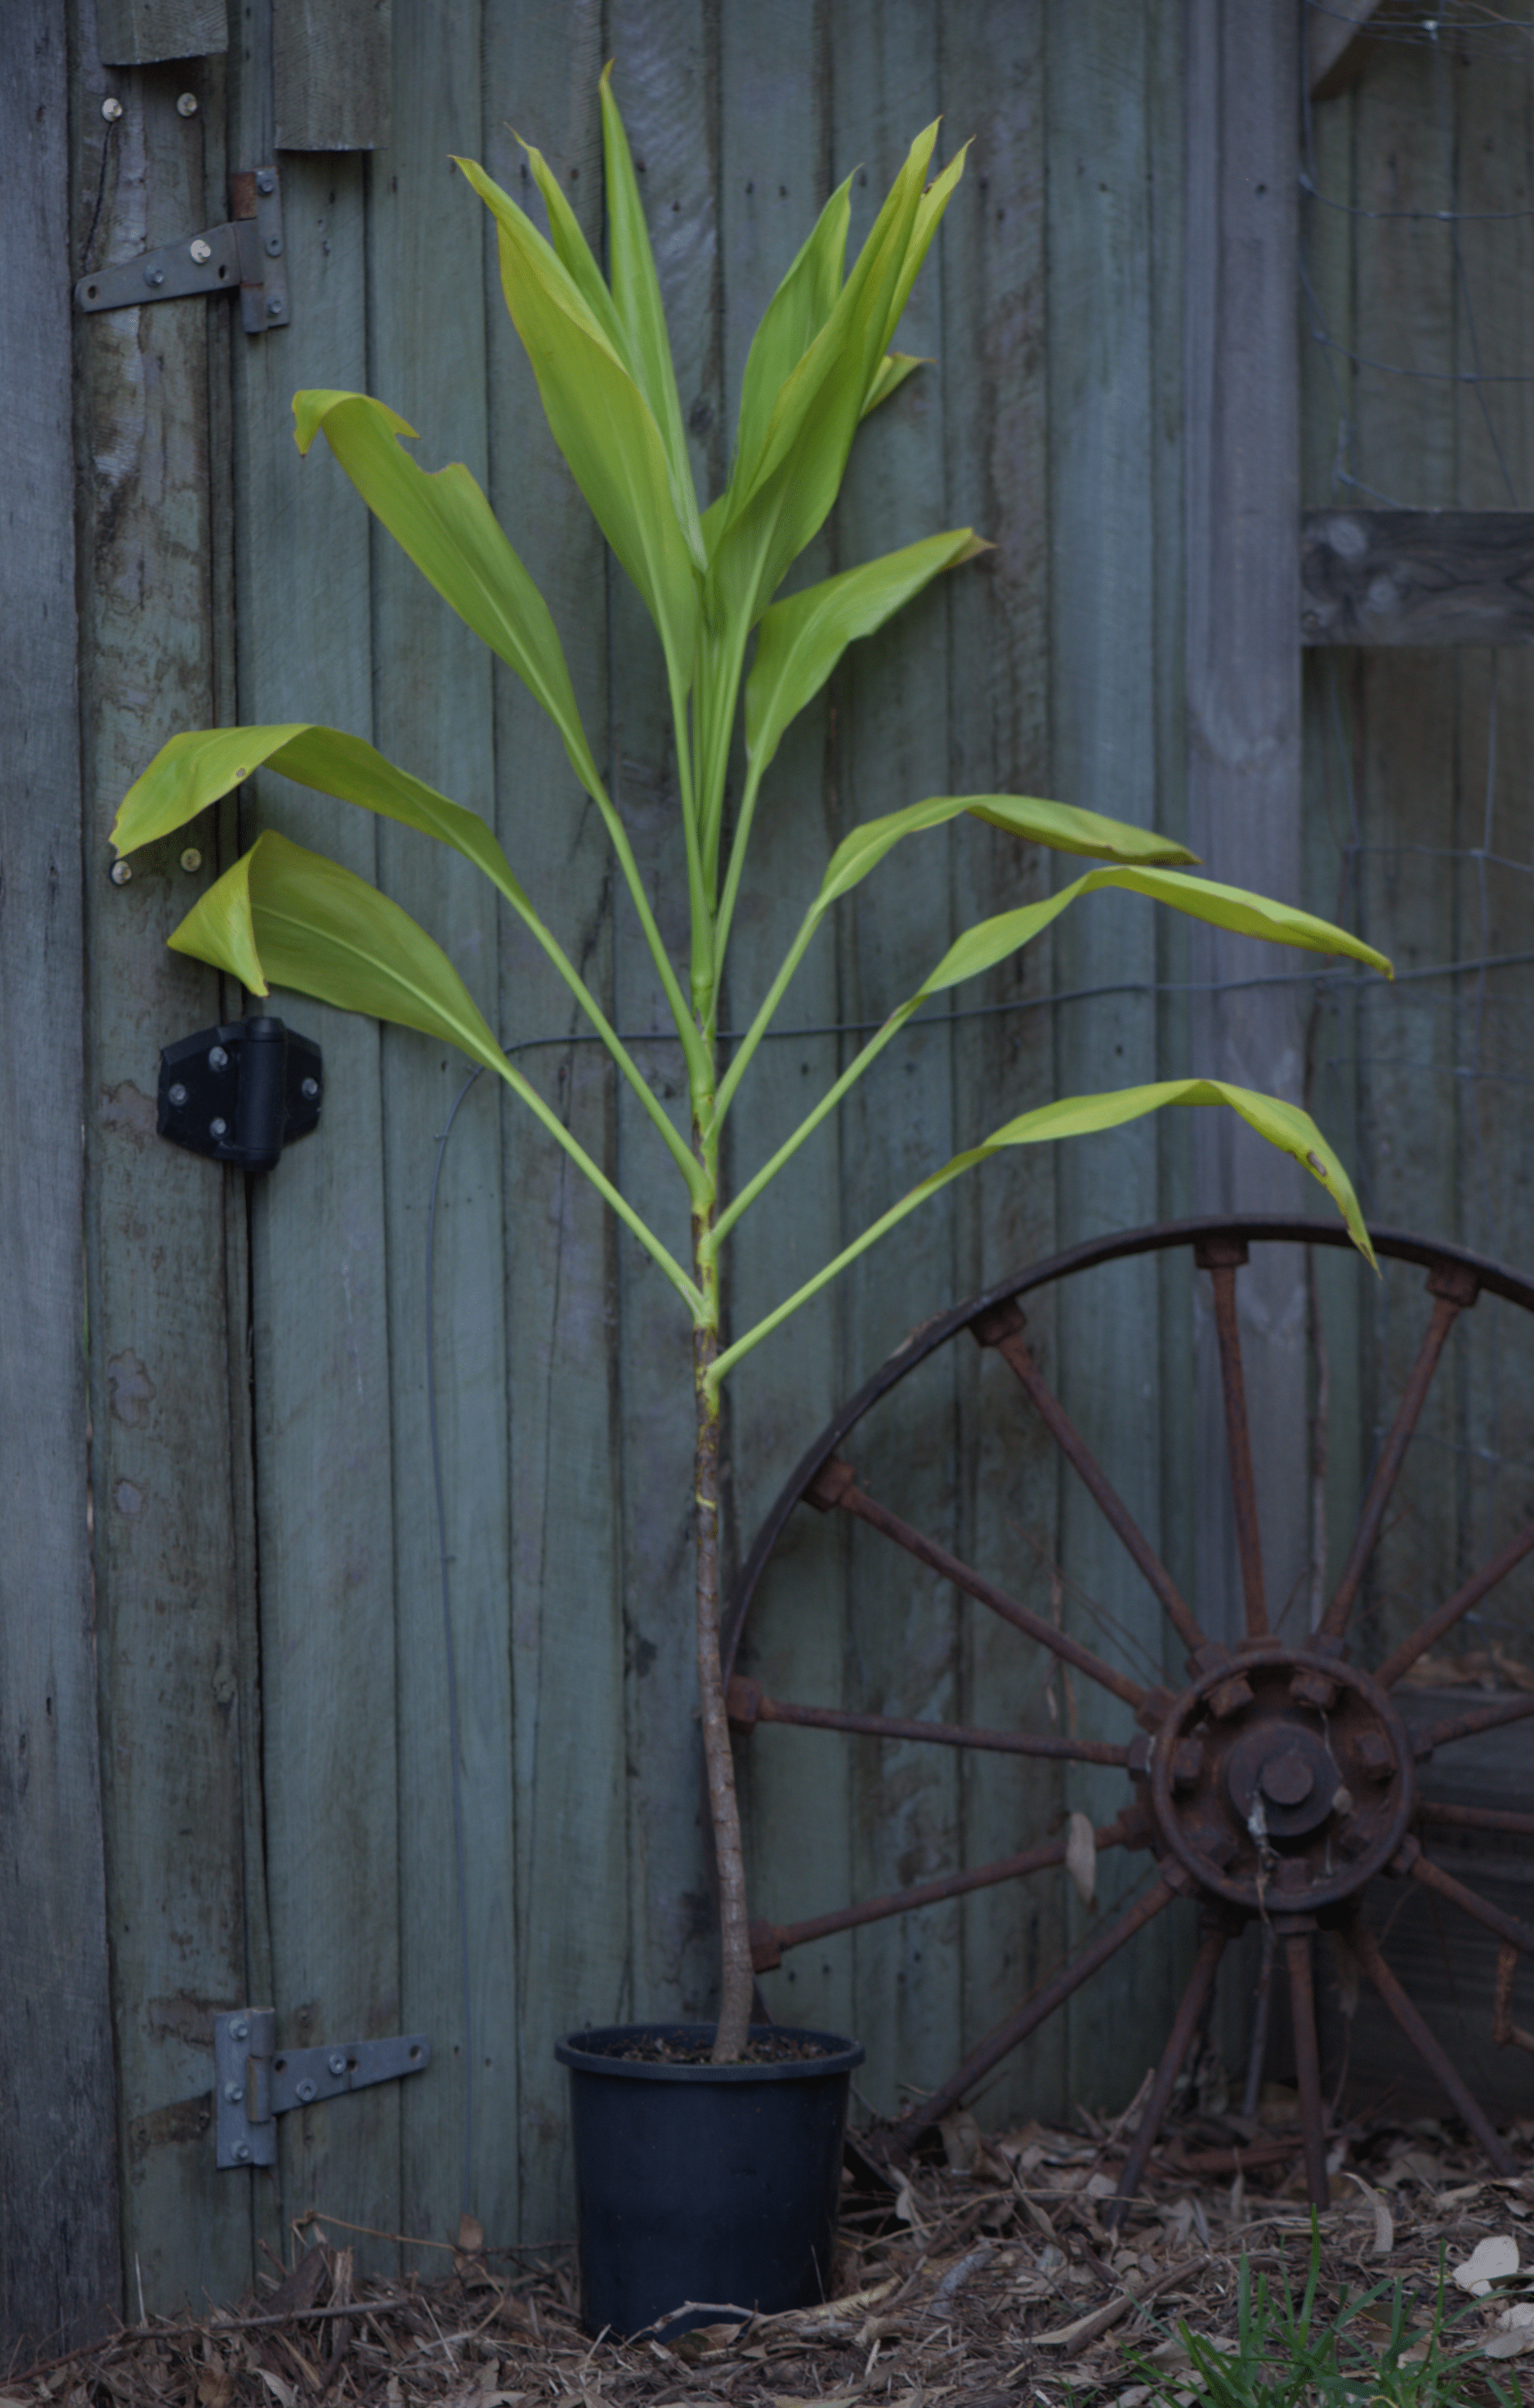 Tall stalk and lovely green leaves of the Alpinia caerulea 'Native ginger' in a large black pot